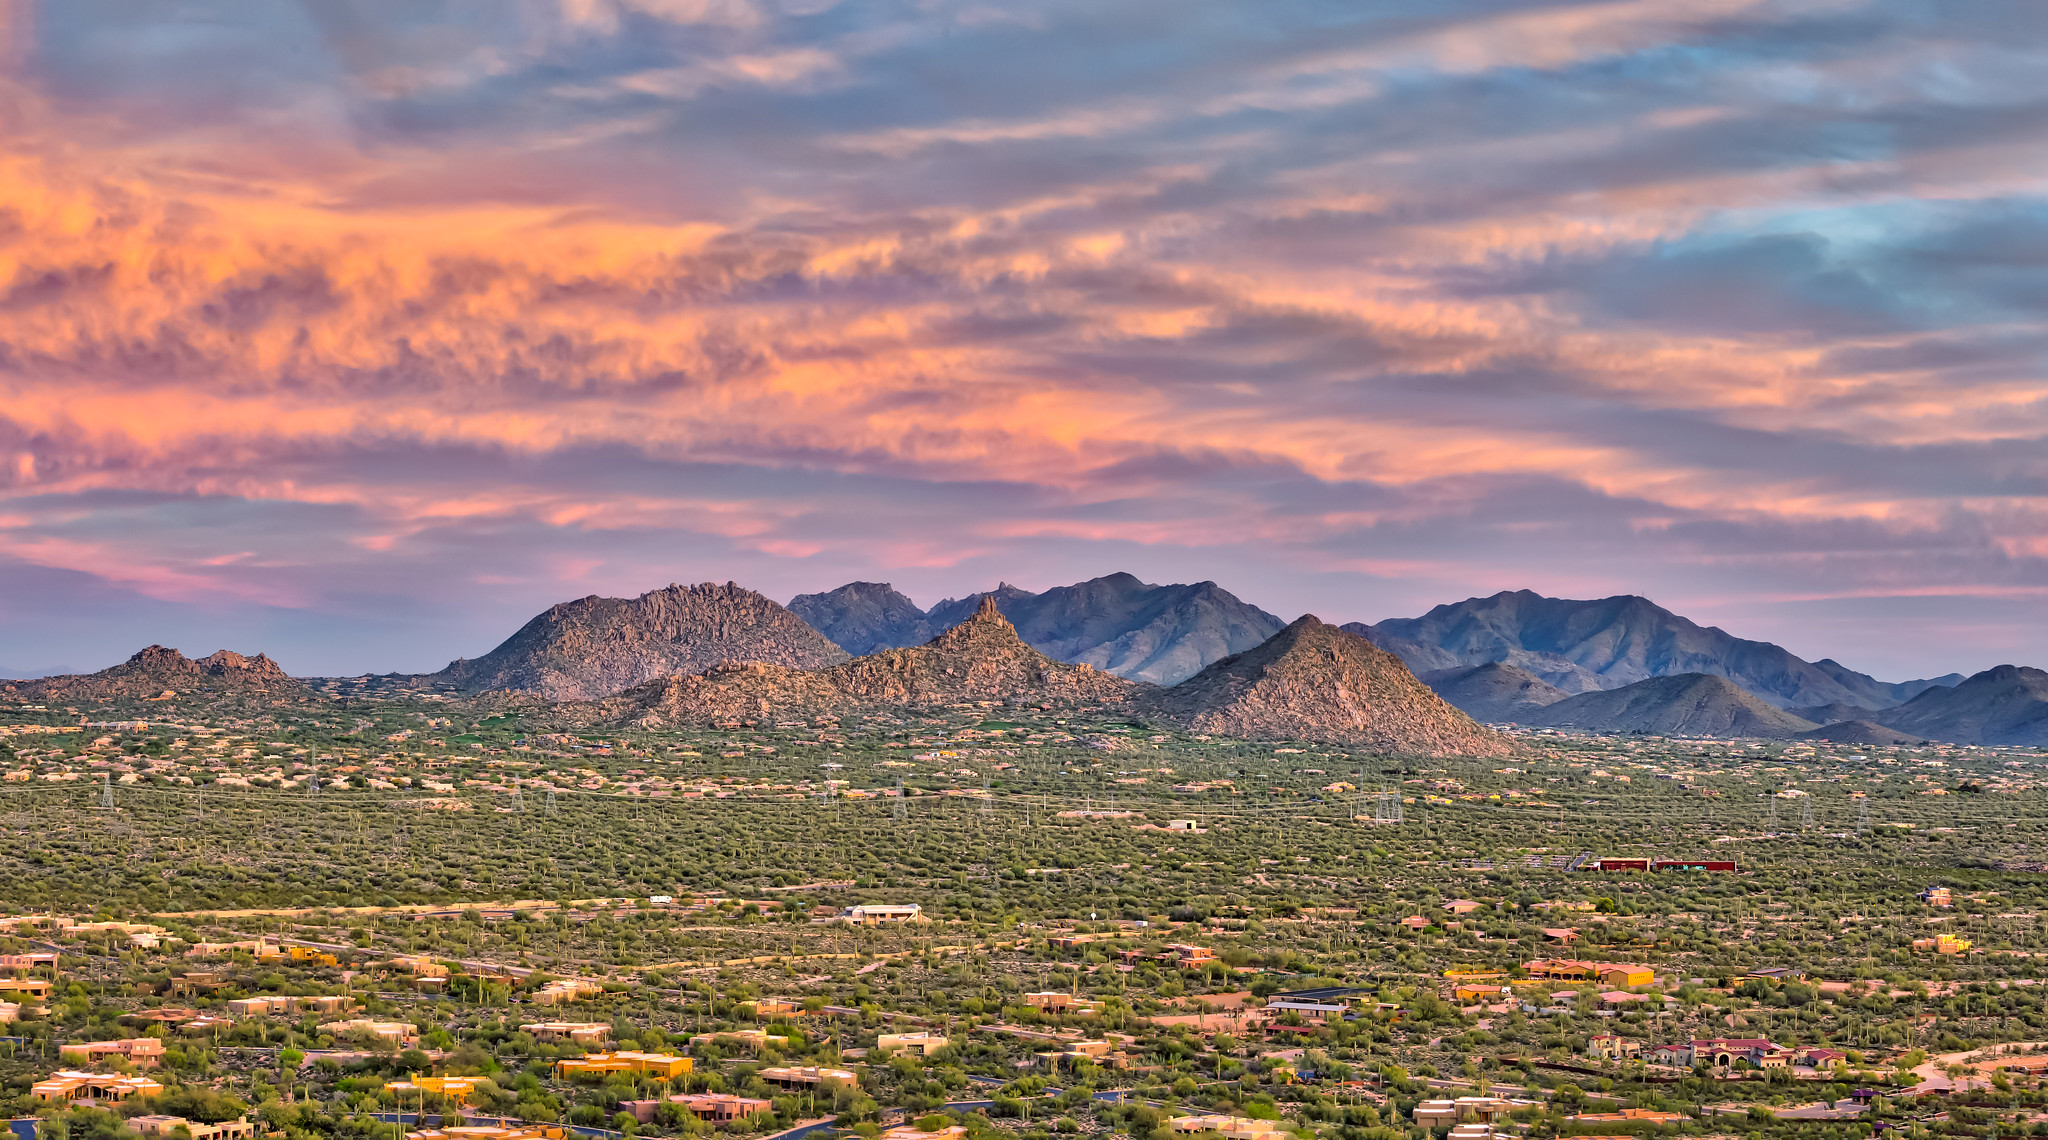 McDowell Mountains, Photo by CEBImagery flickr